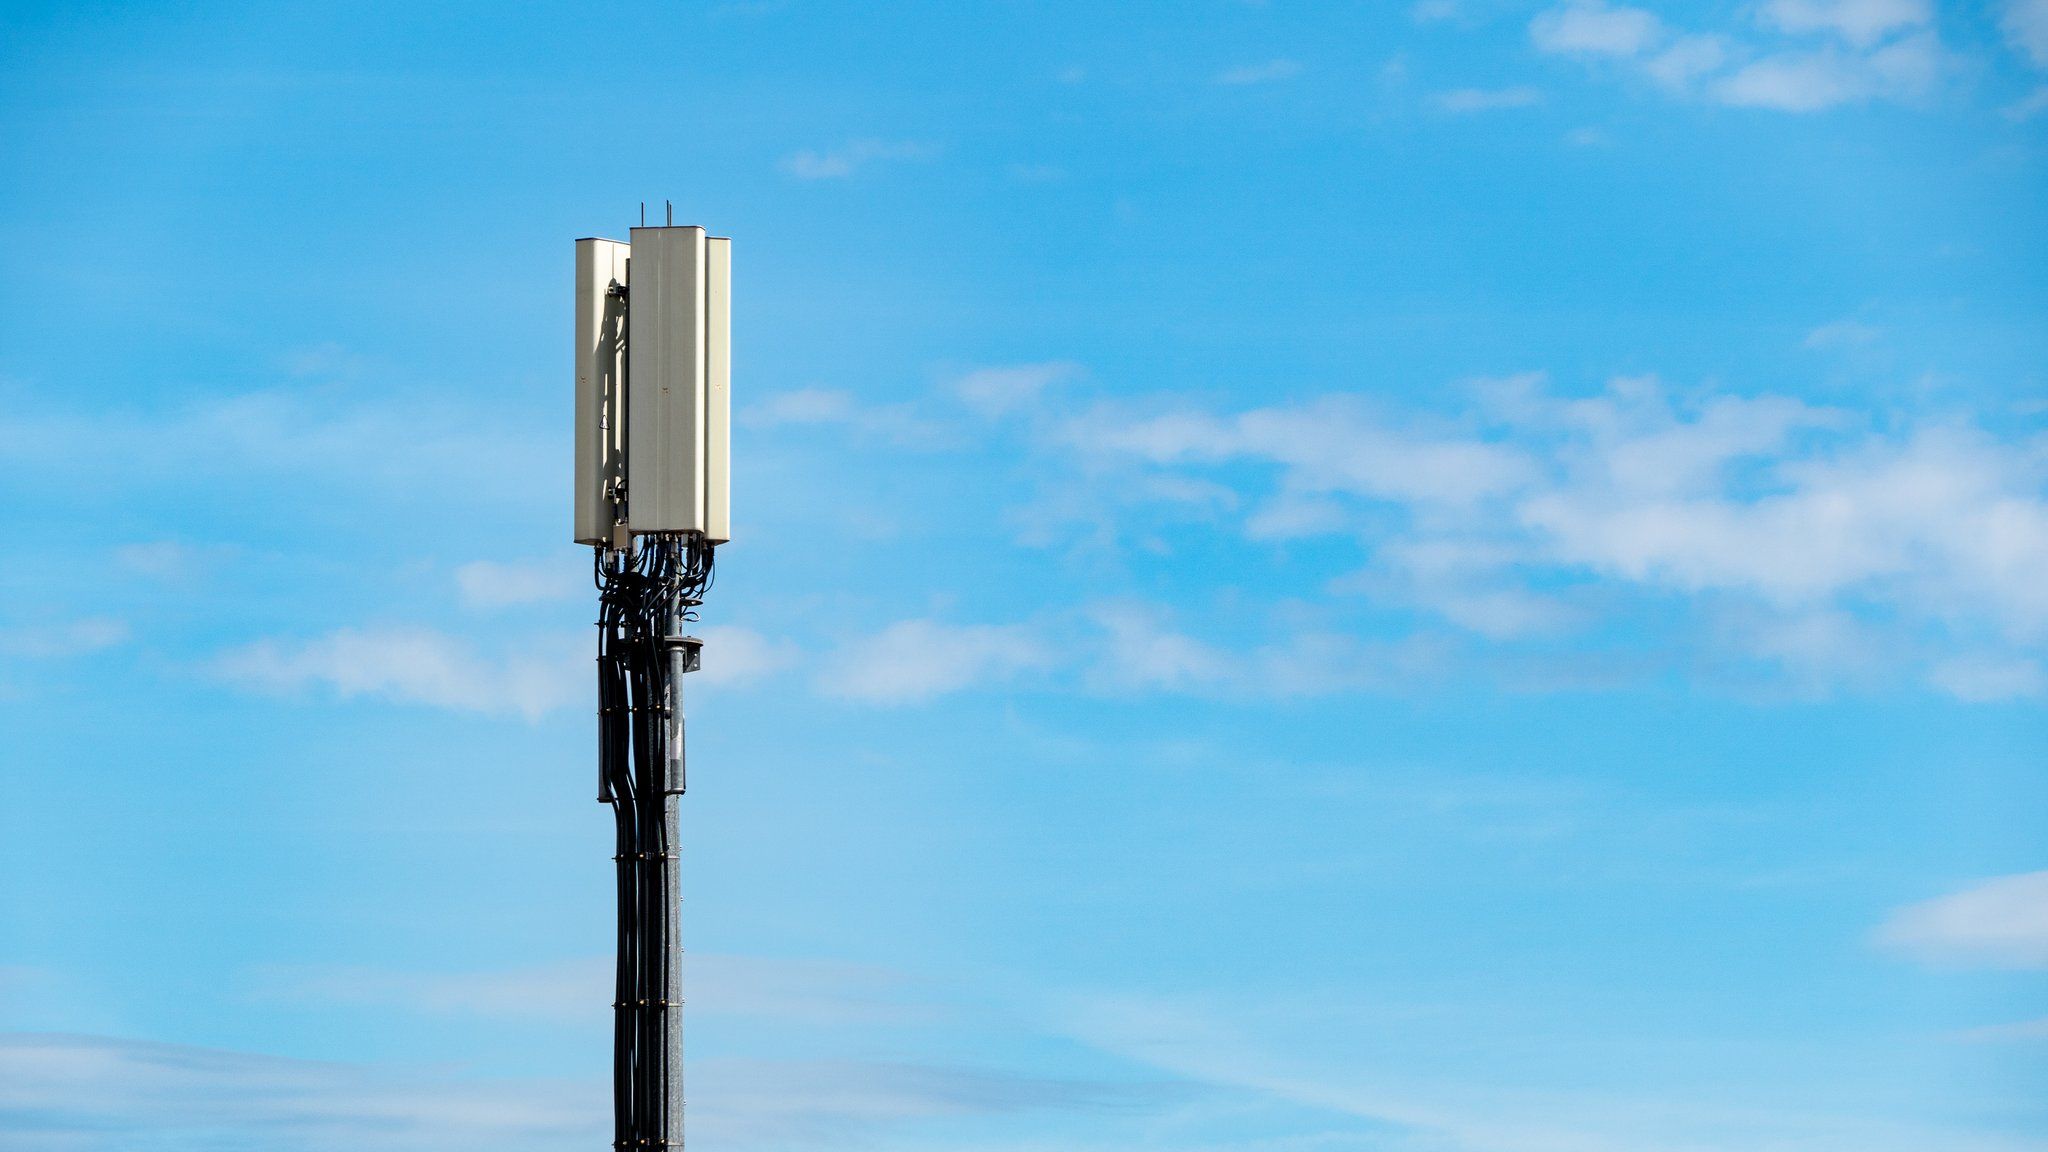 A mobile phone tower